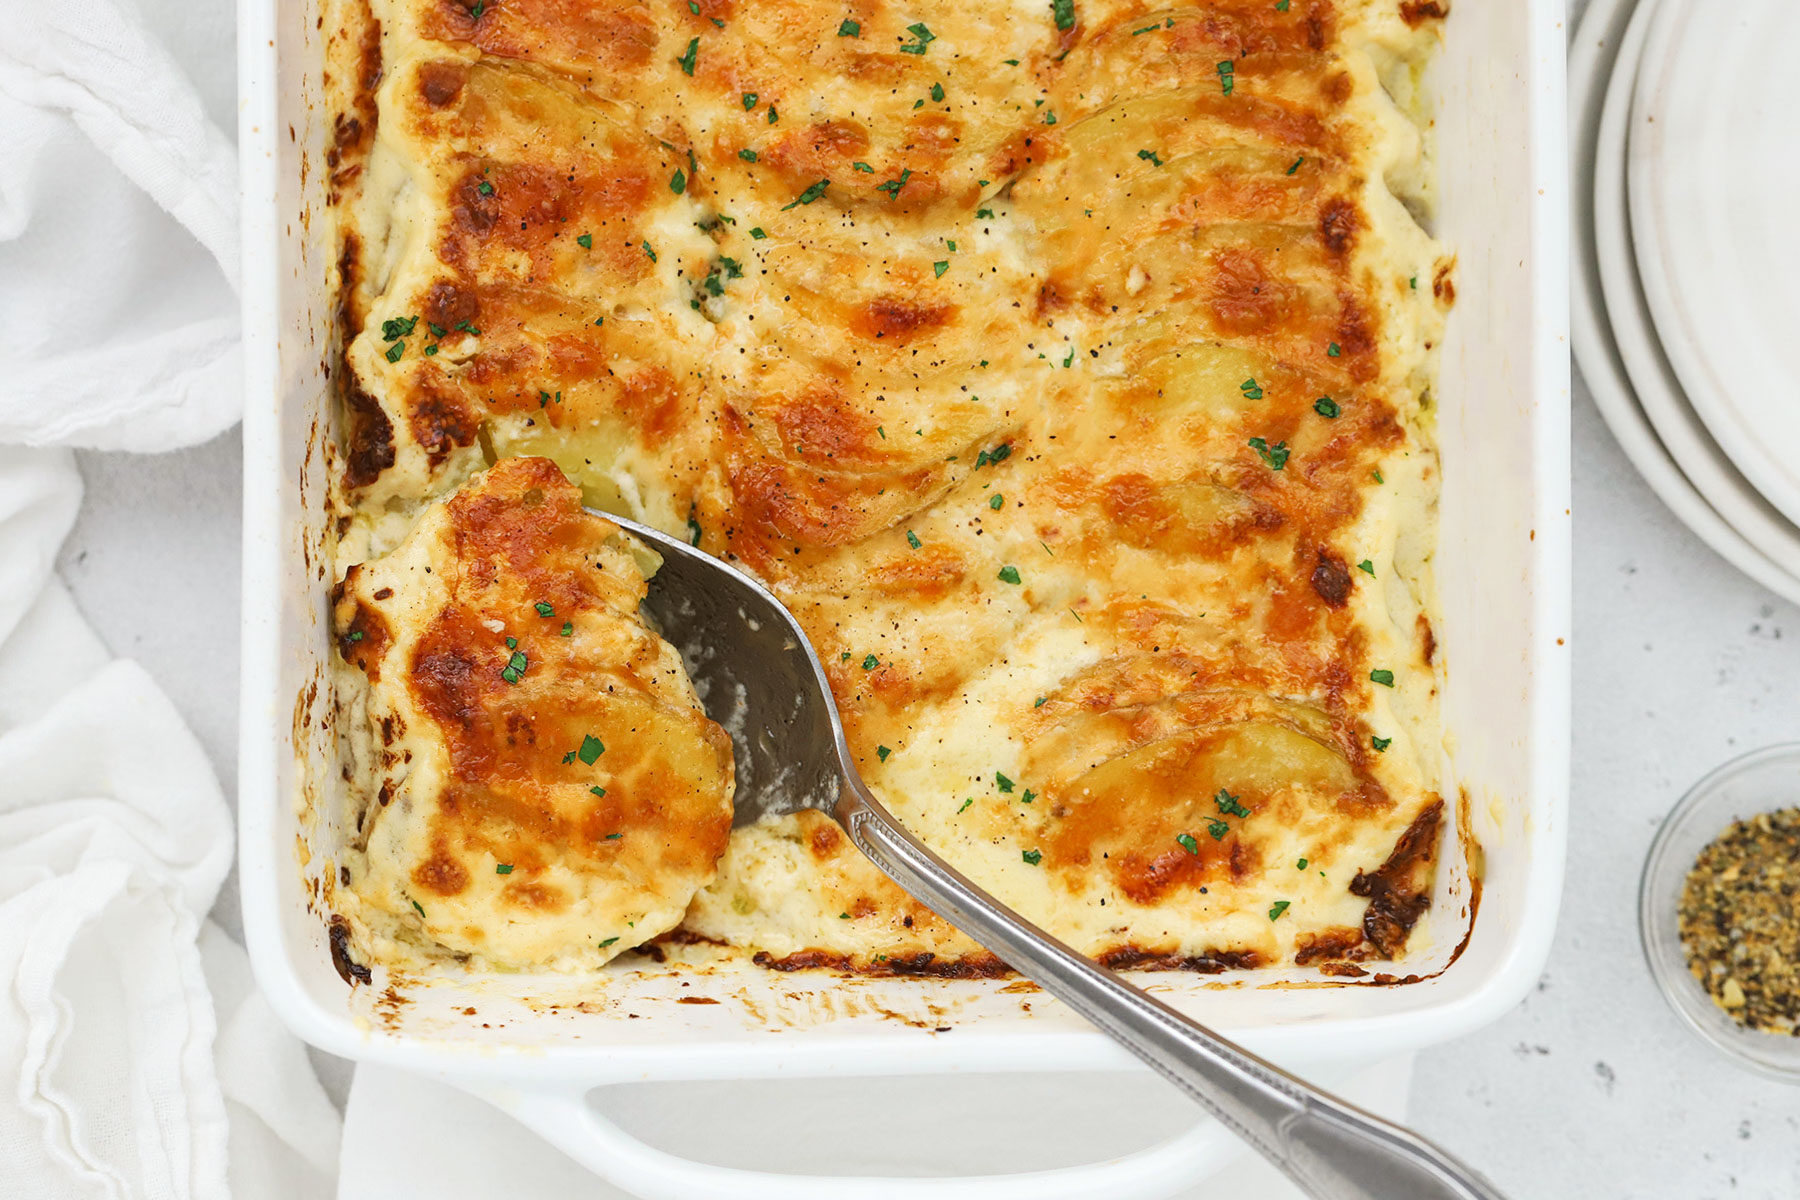 scooping gluten-free scalloped potatoes out of a white baking dish